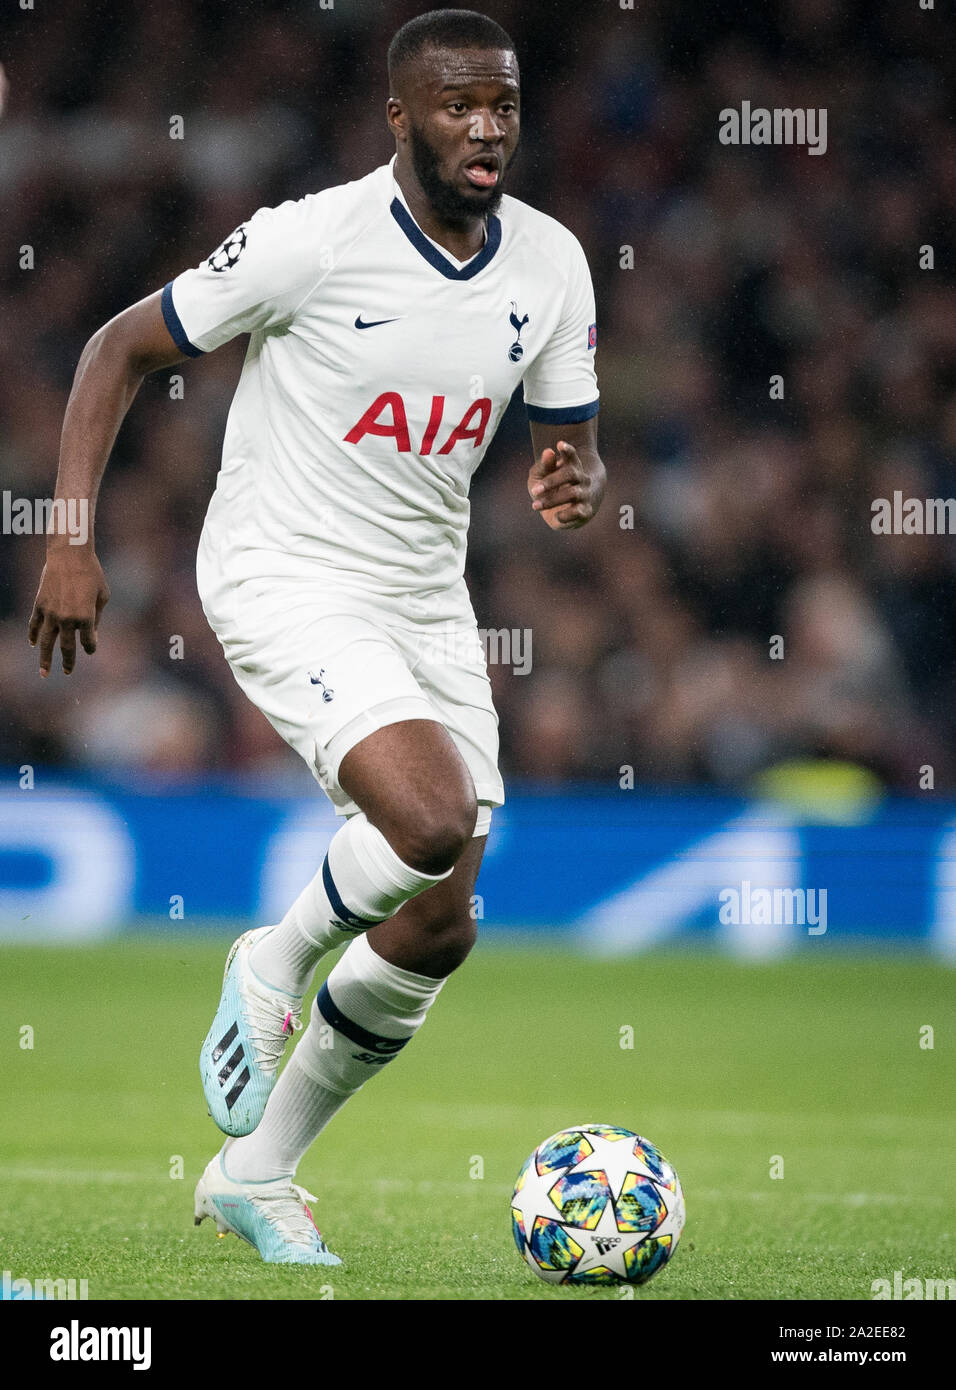 London, UK. 01st Oct, 2019. Tanguy NDombele of Spurs during the UEFA Champions League group match between Tottenham Hotspur and Bayern Munich at Wembley Stadium, London, England on 1 October 2019. Photo by Andy Rowland. Credit: PRiME Media Images/Alamy Live News Stock Photo